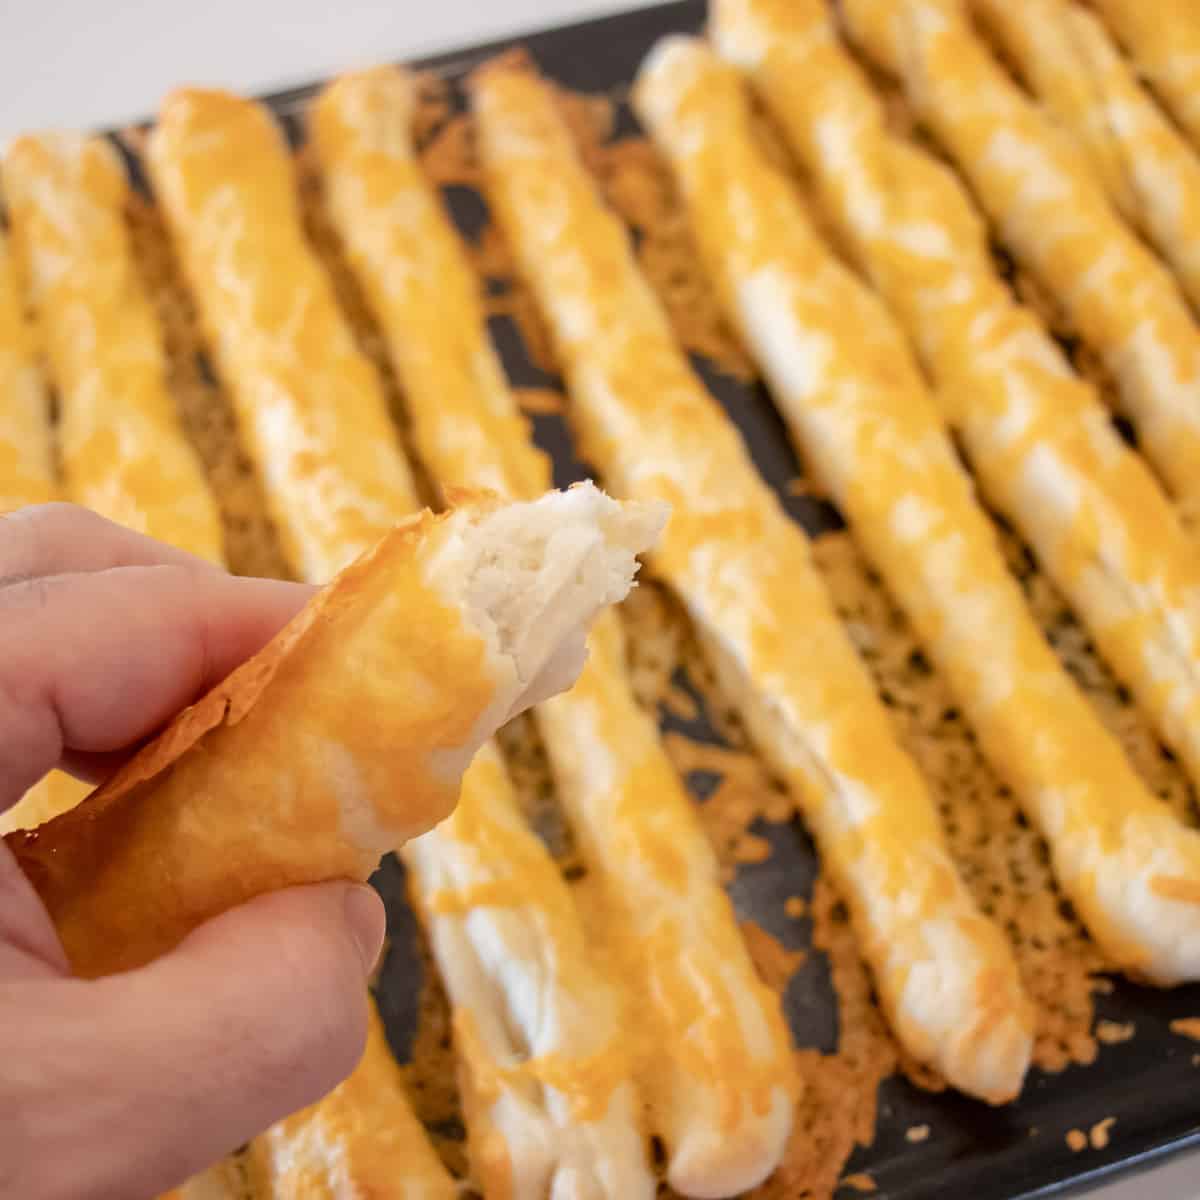 Fresh baked breadstick torn to show the fluffy inside.